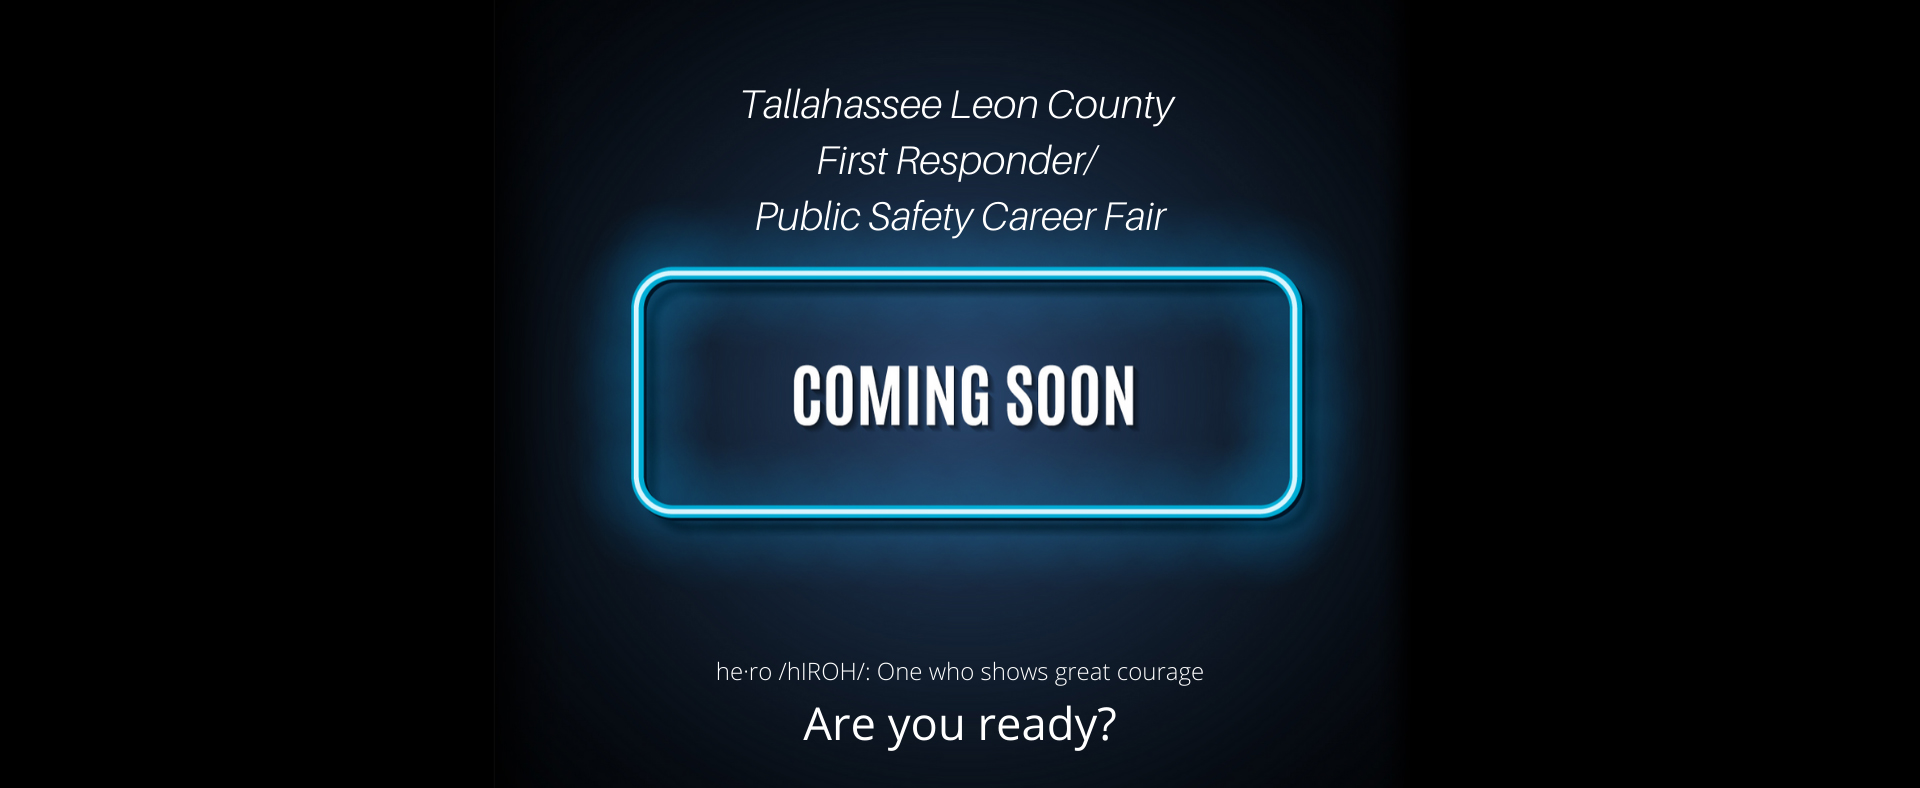 Tallahassee-Leon-County-First-Responder-Public-Safety-Career-Fair